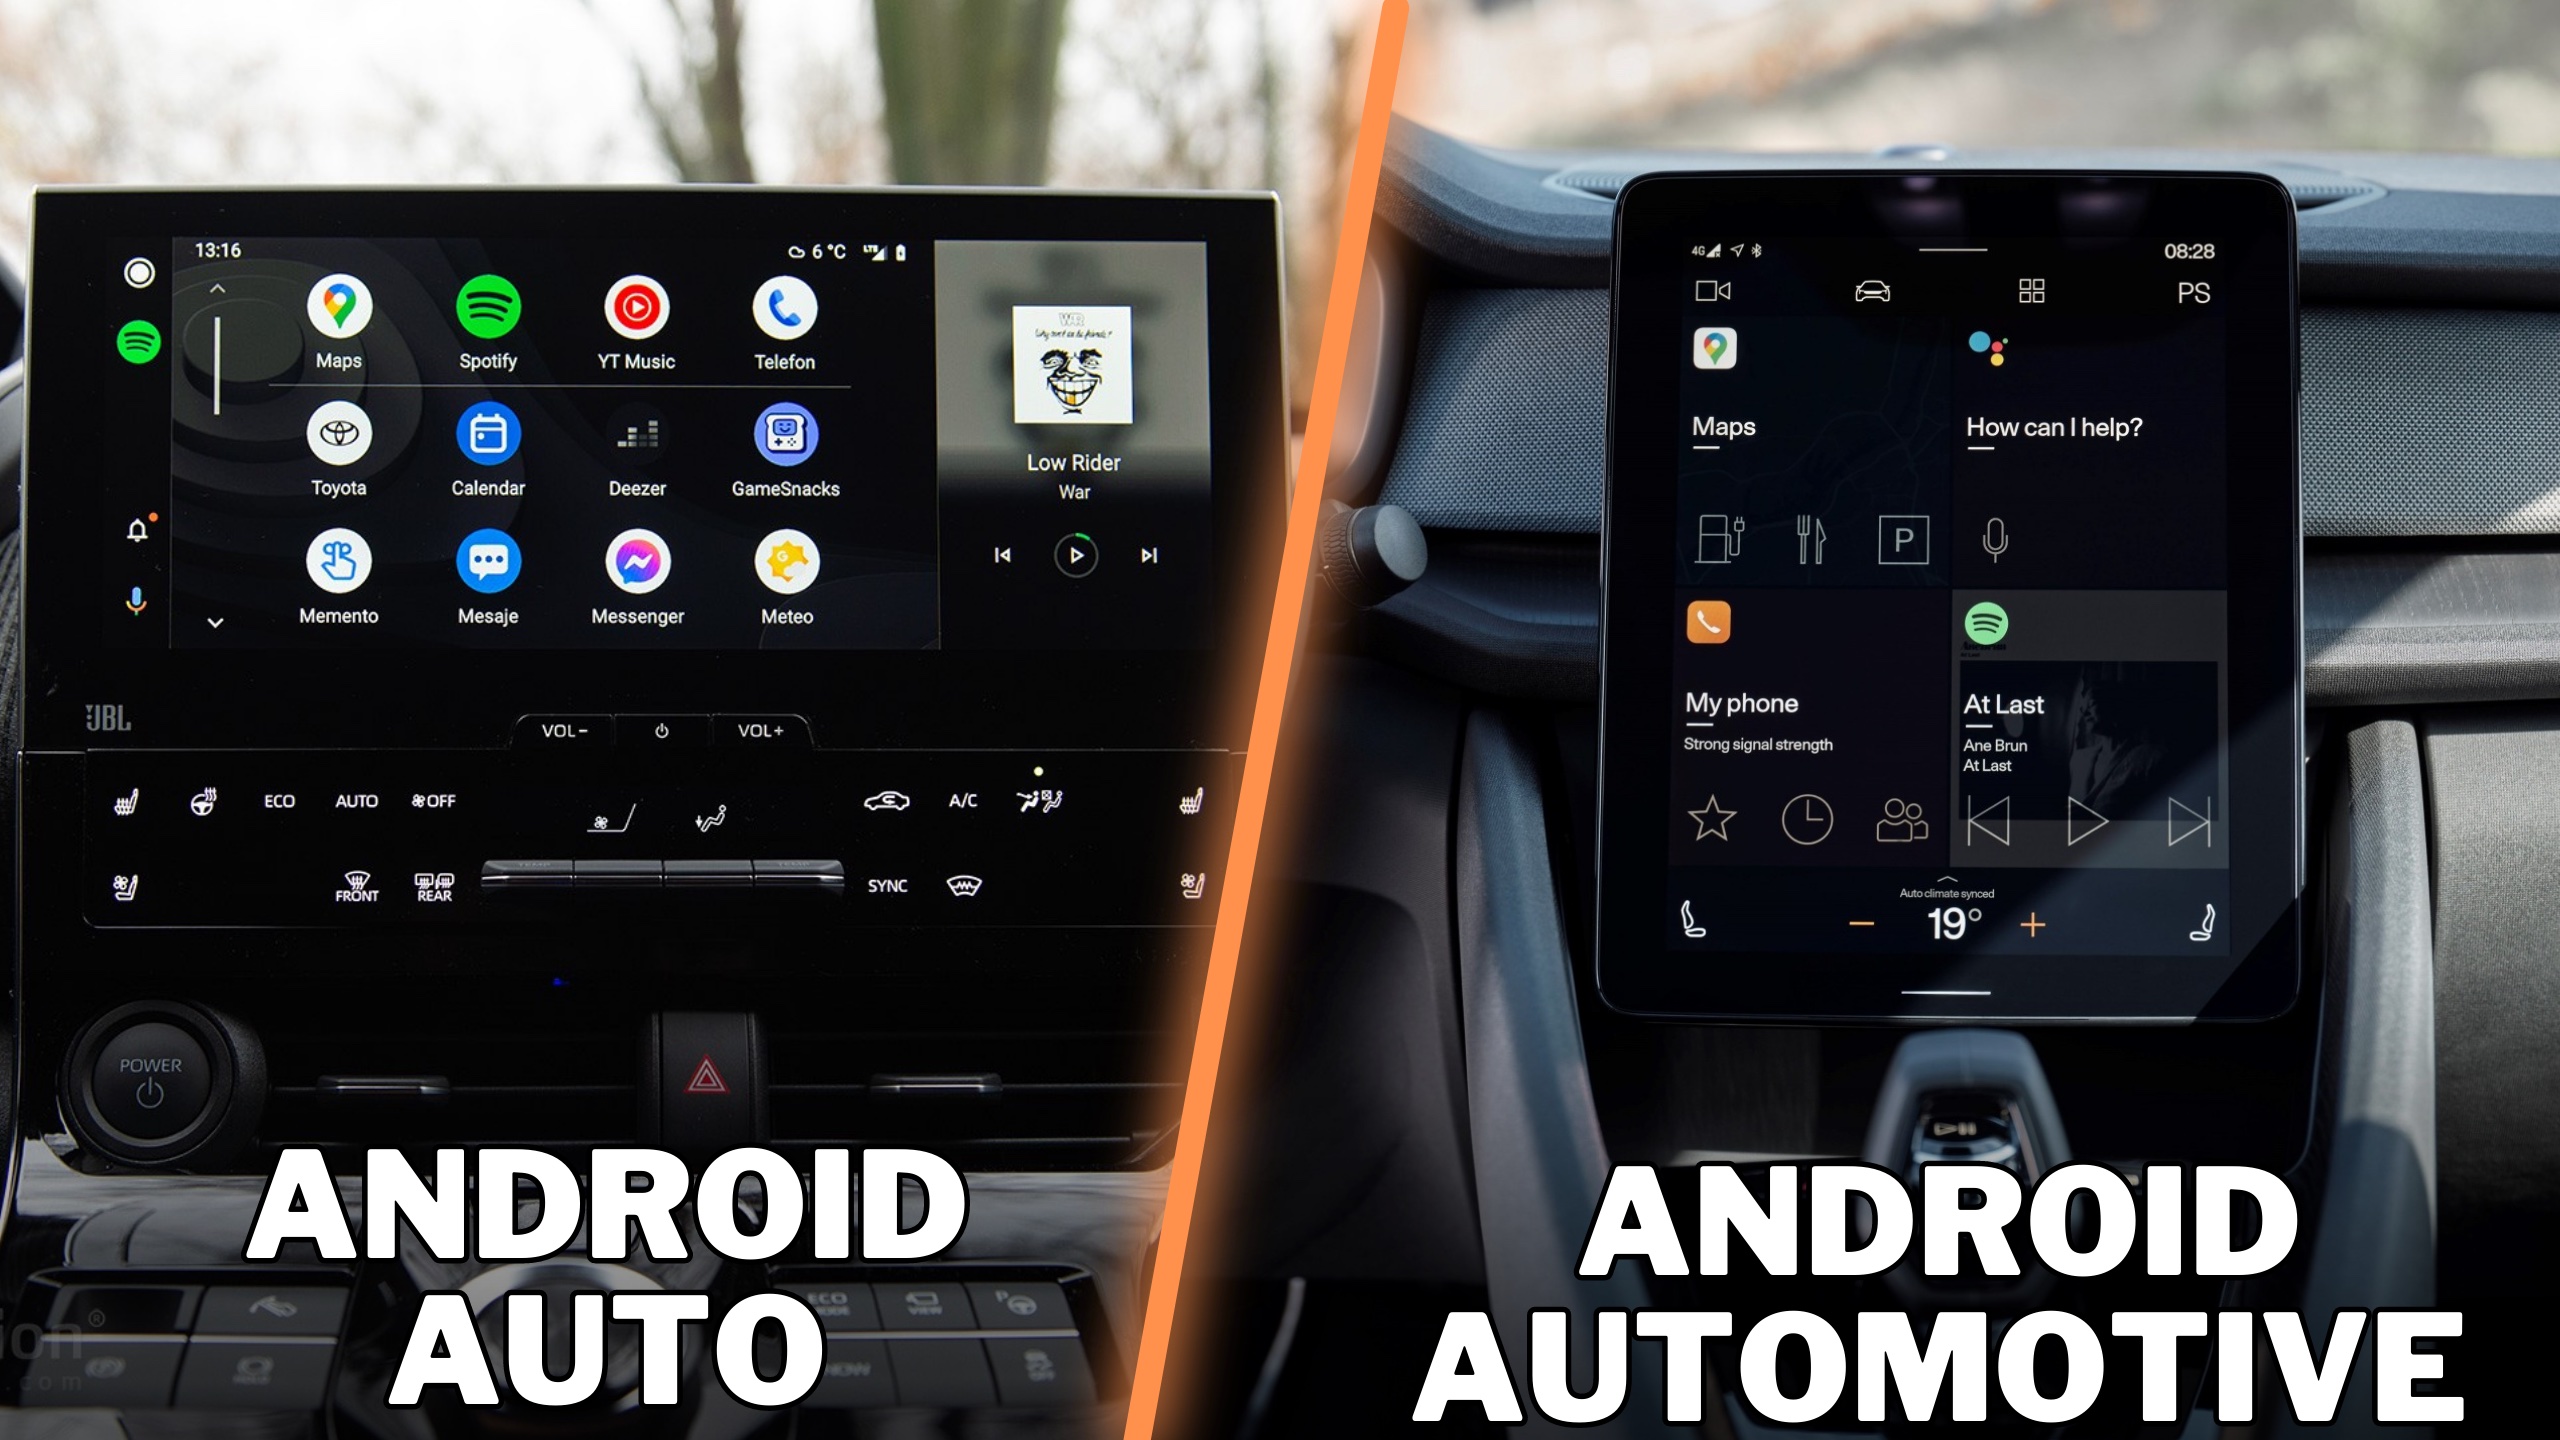 Volkswagen Unintentionally Demonstrated Android Auto Is a